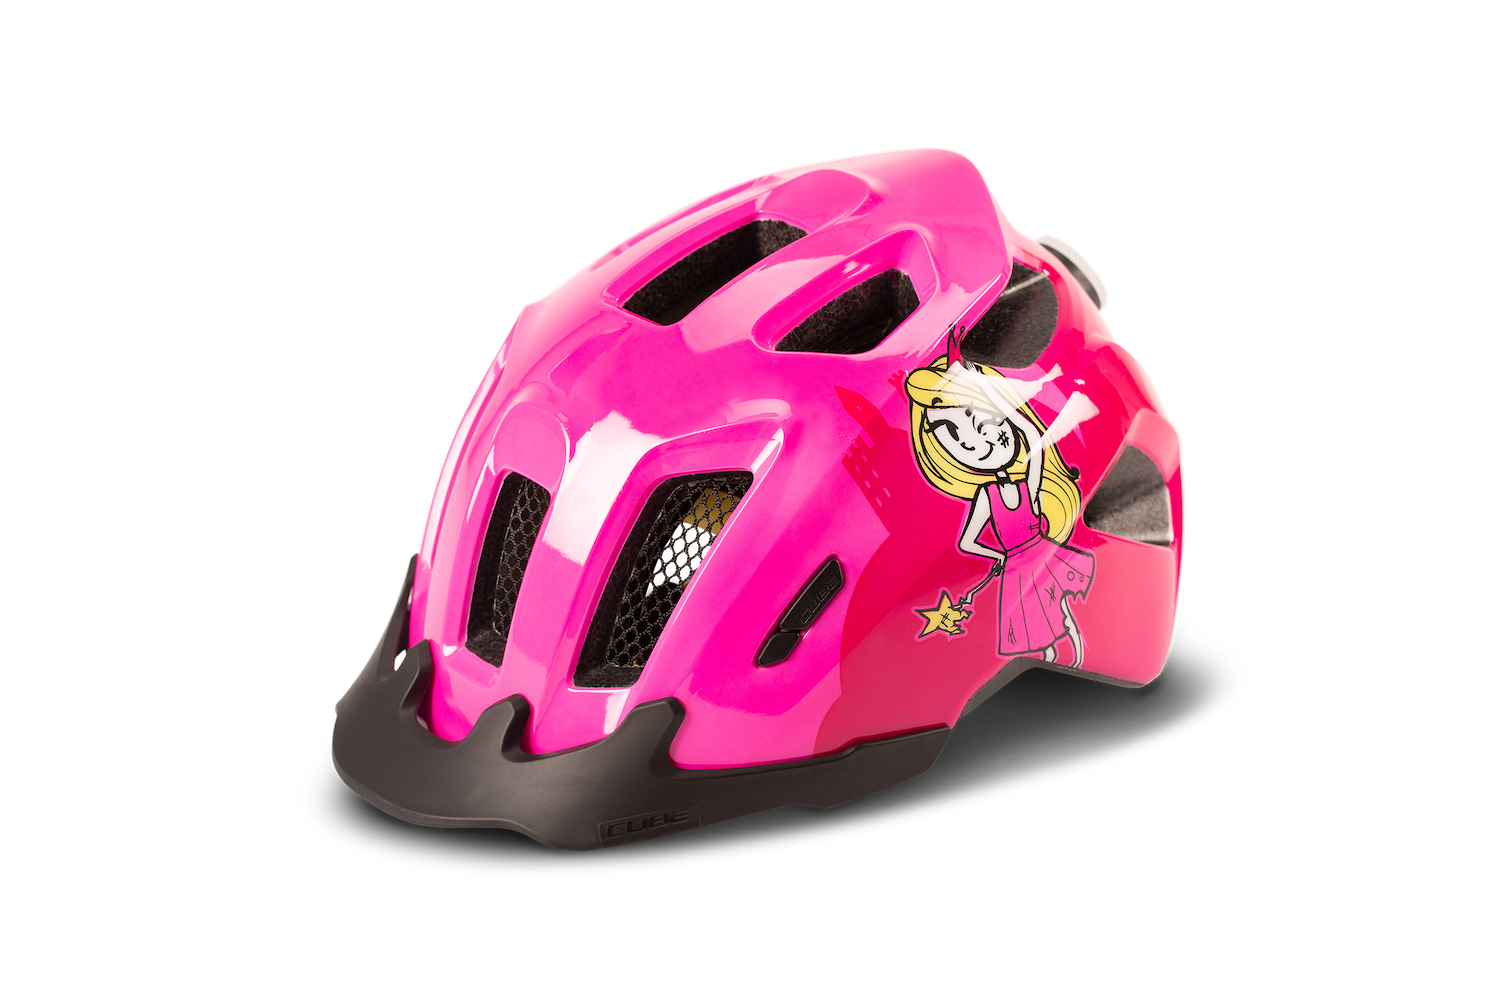 CUBE Helm ANT (pink)